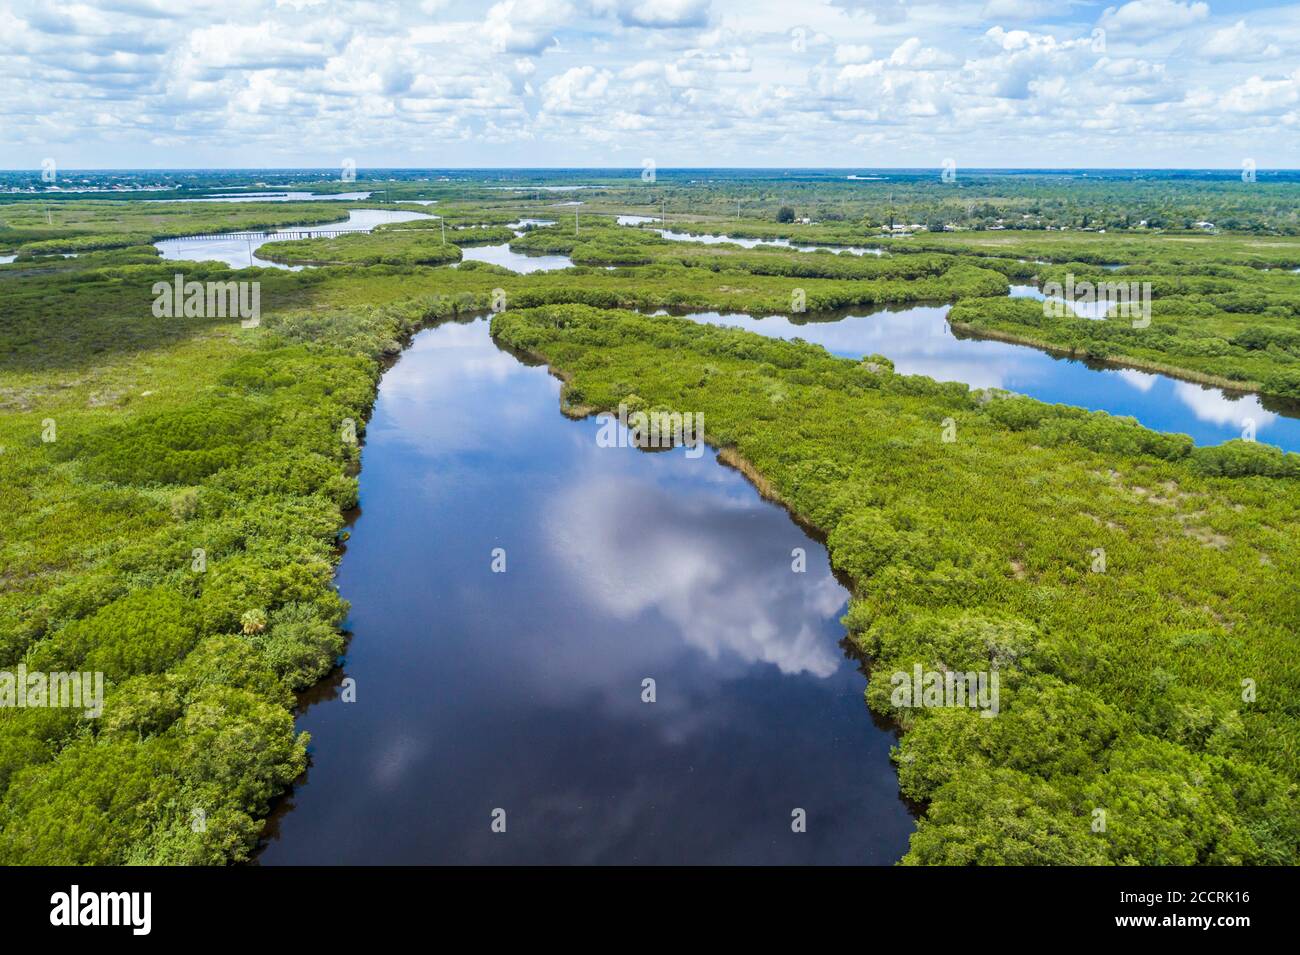 Florida,Punta Gorda,Peace River water,Shell Creek water,mangrove islands,aerial overhead bird's eye view above,visitors travel traveling tour tourist Stock Photo